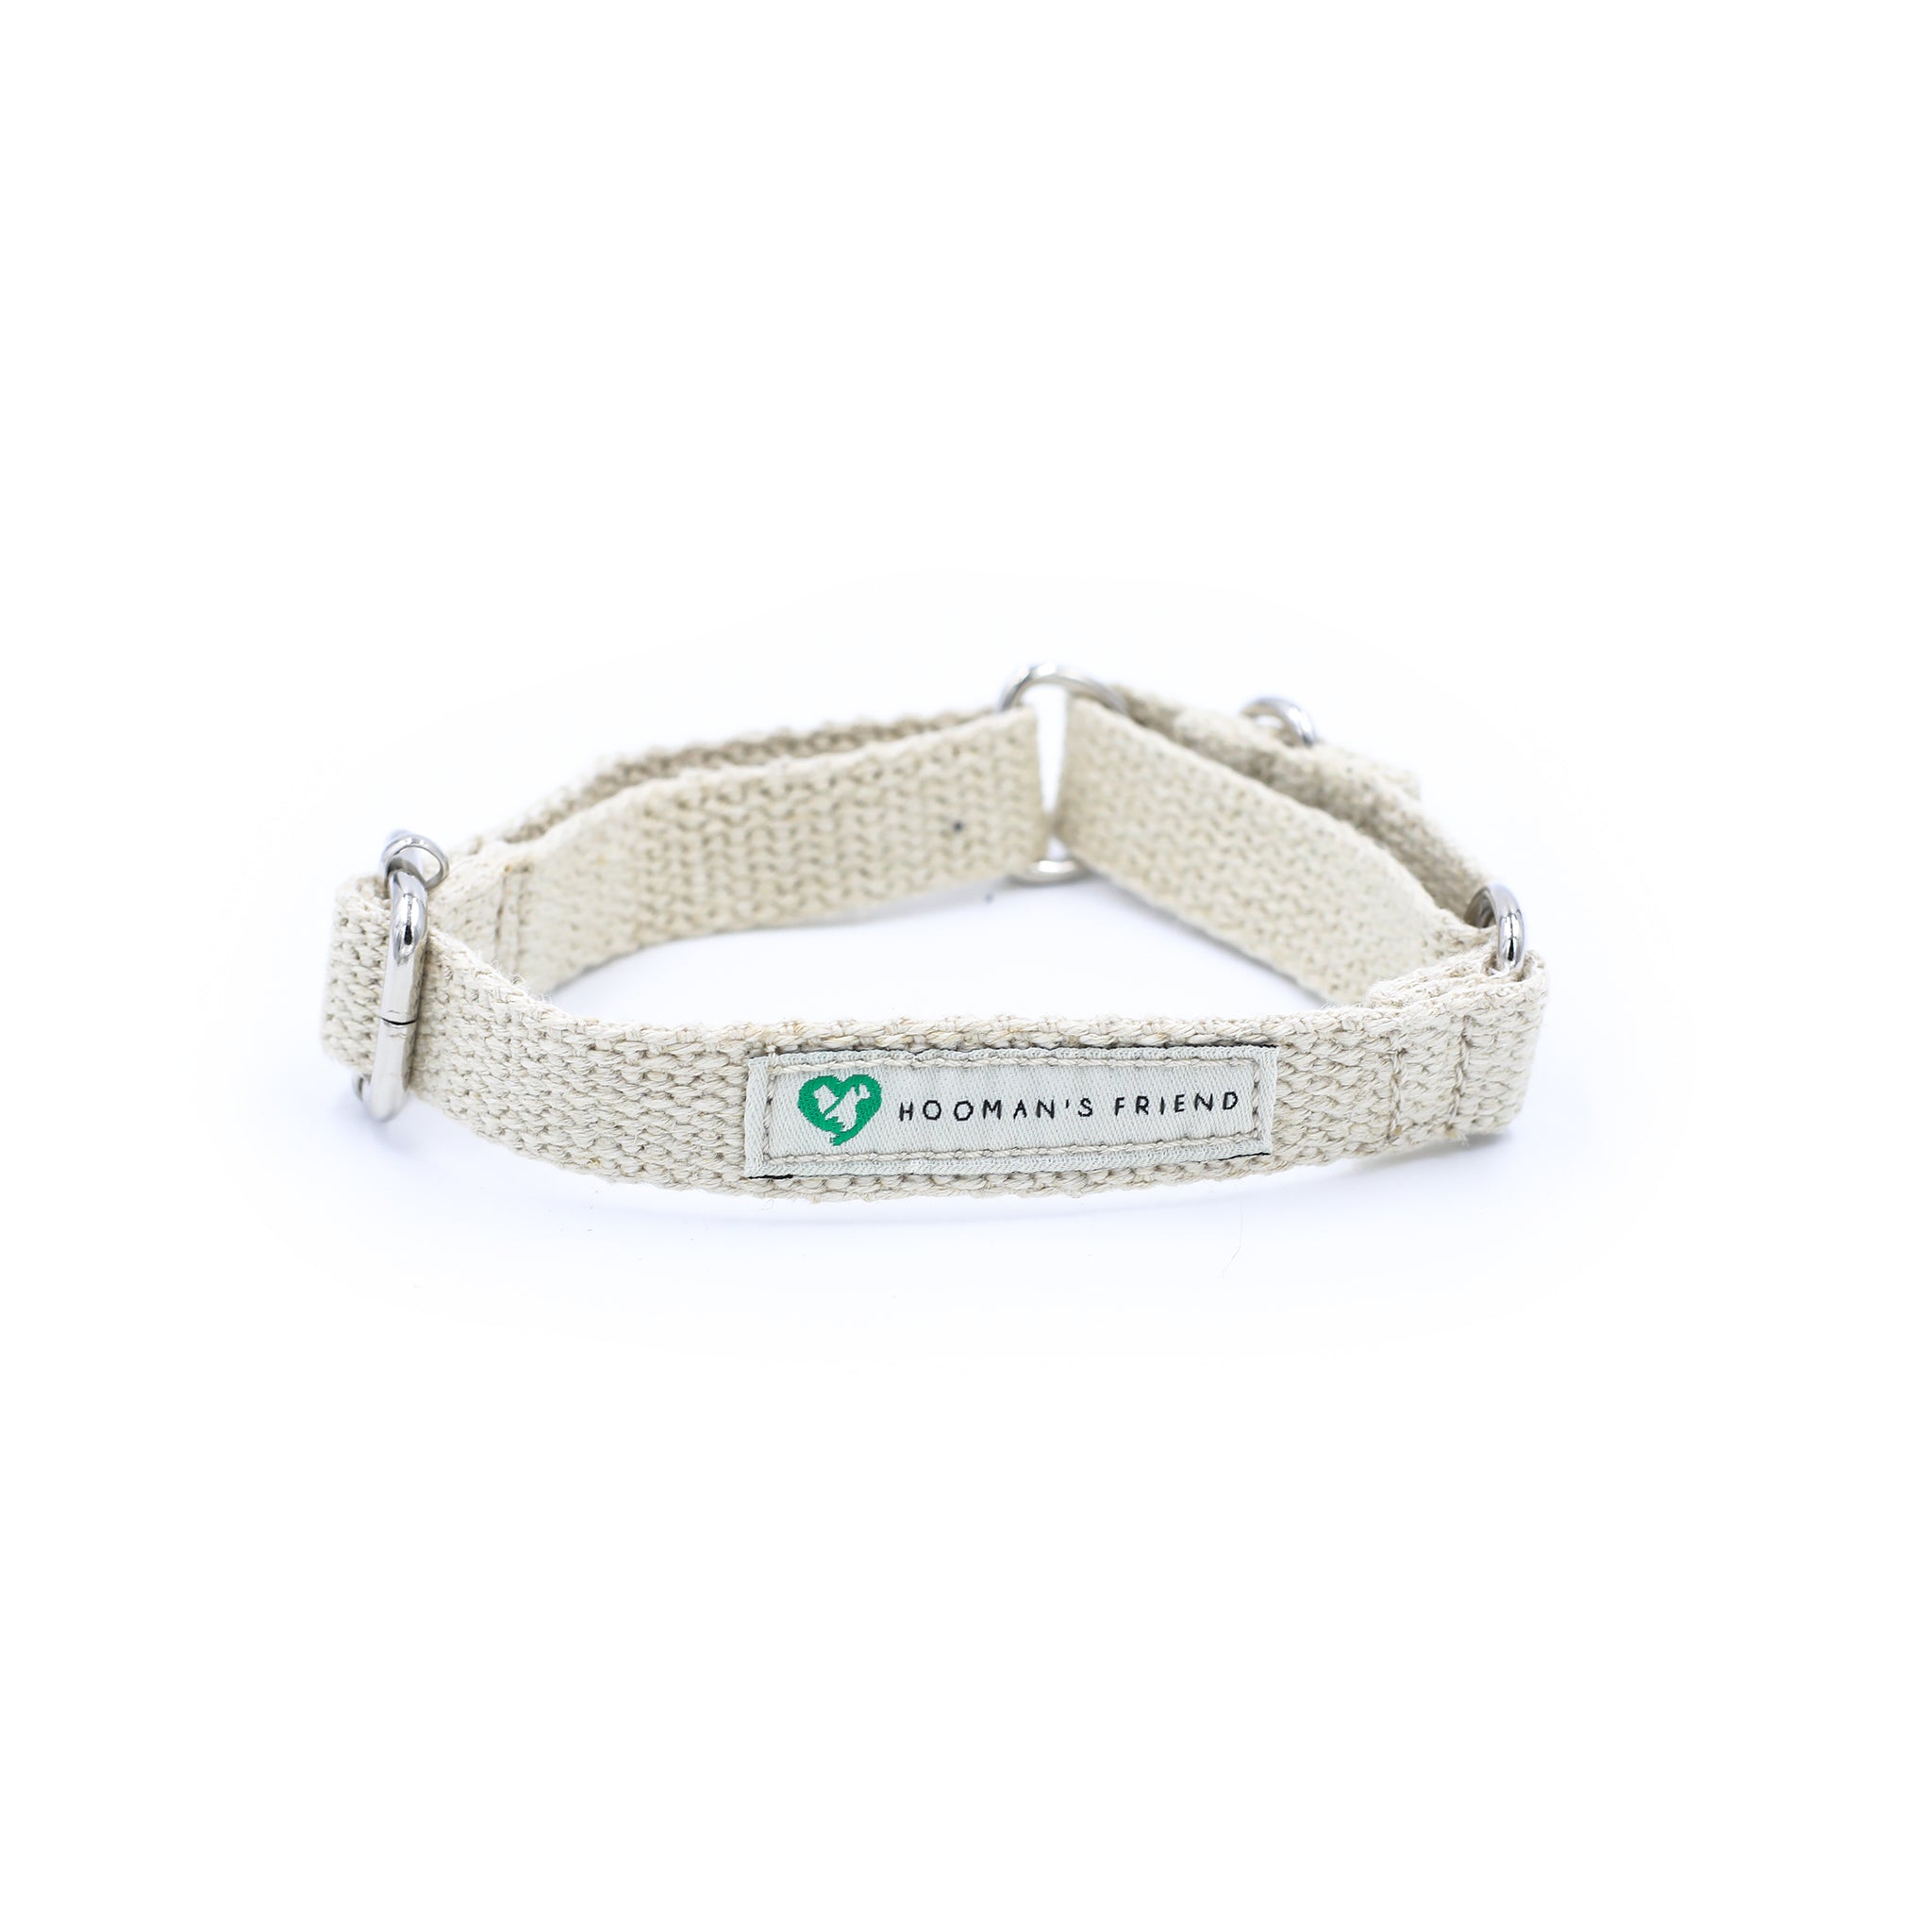 A Hoomans friends natural jute hemp martingale style collar. Placed upon a white background. The natural dog collar is facing so you can see the natural cotton logo. This is a size small